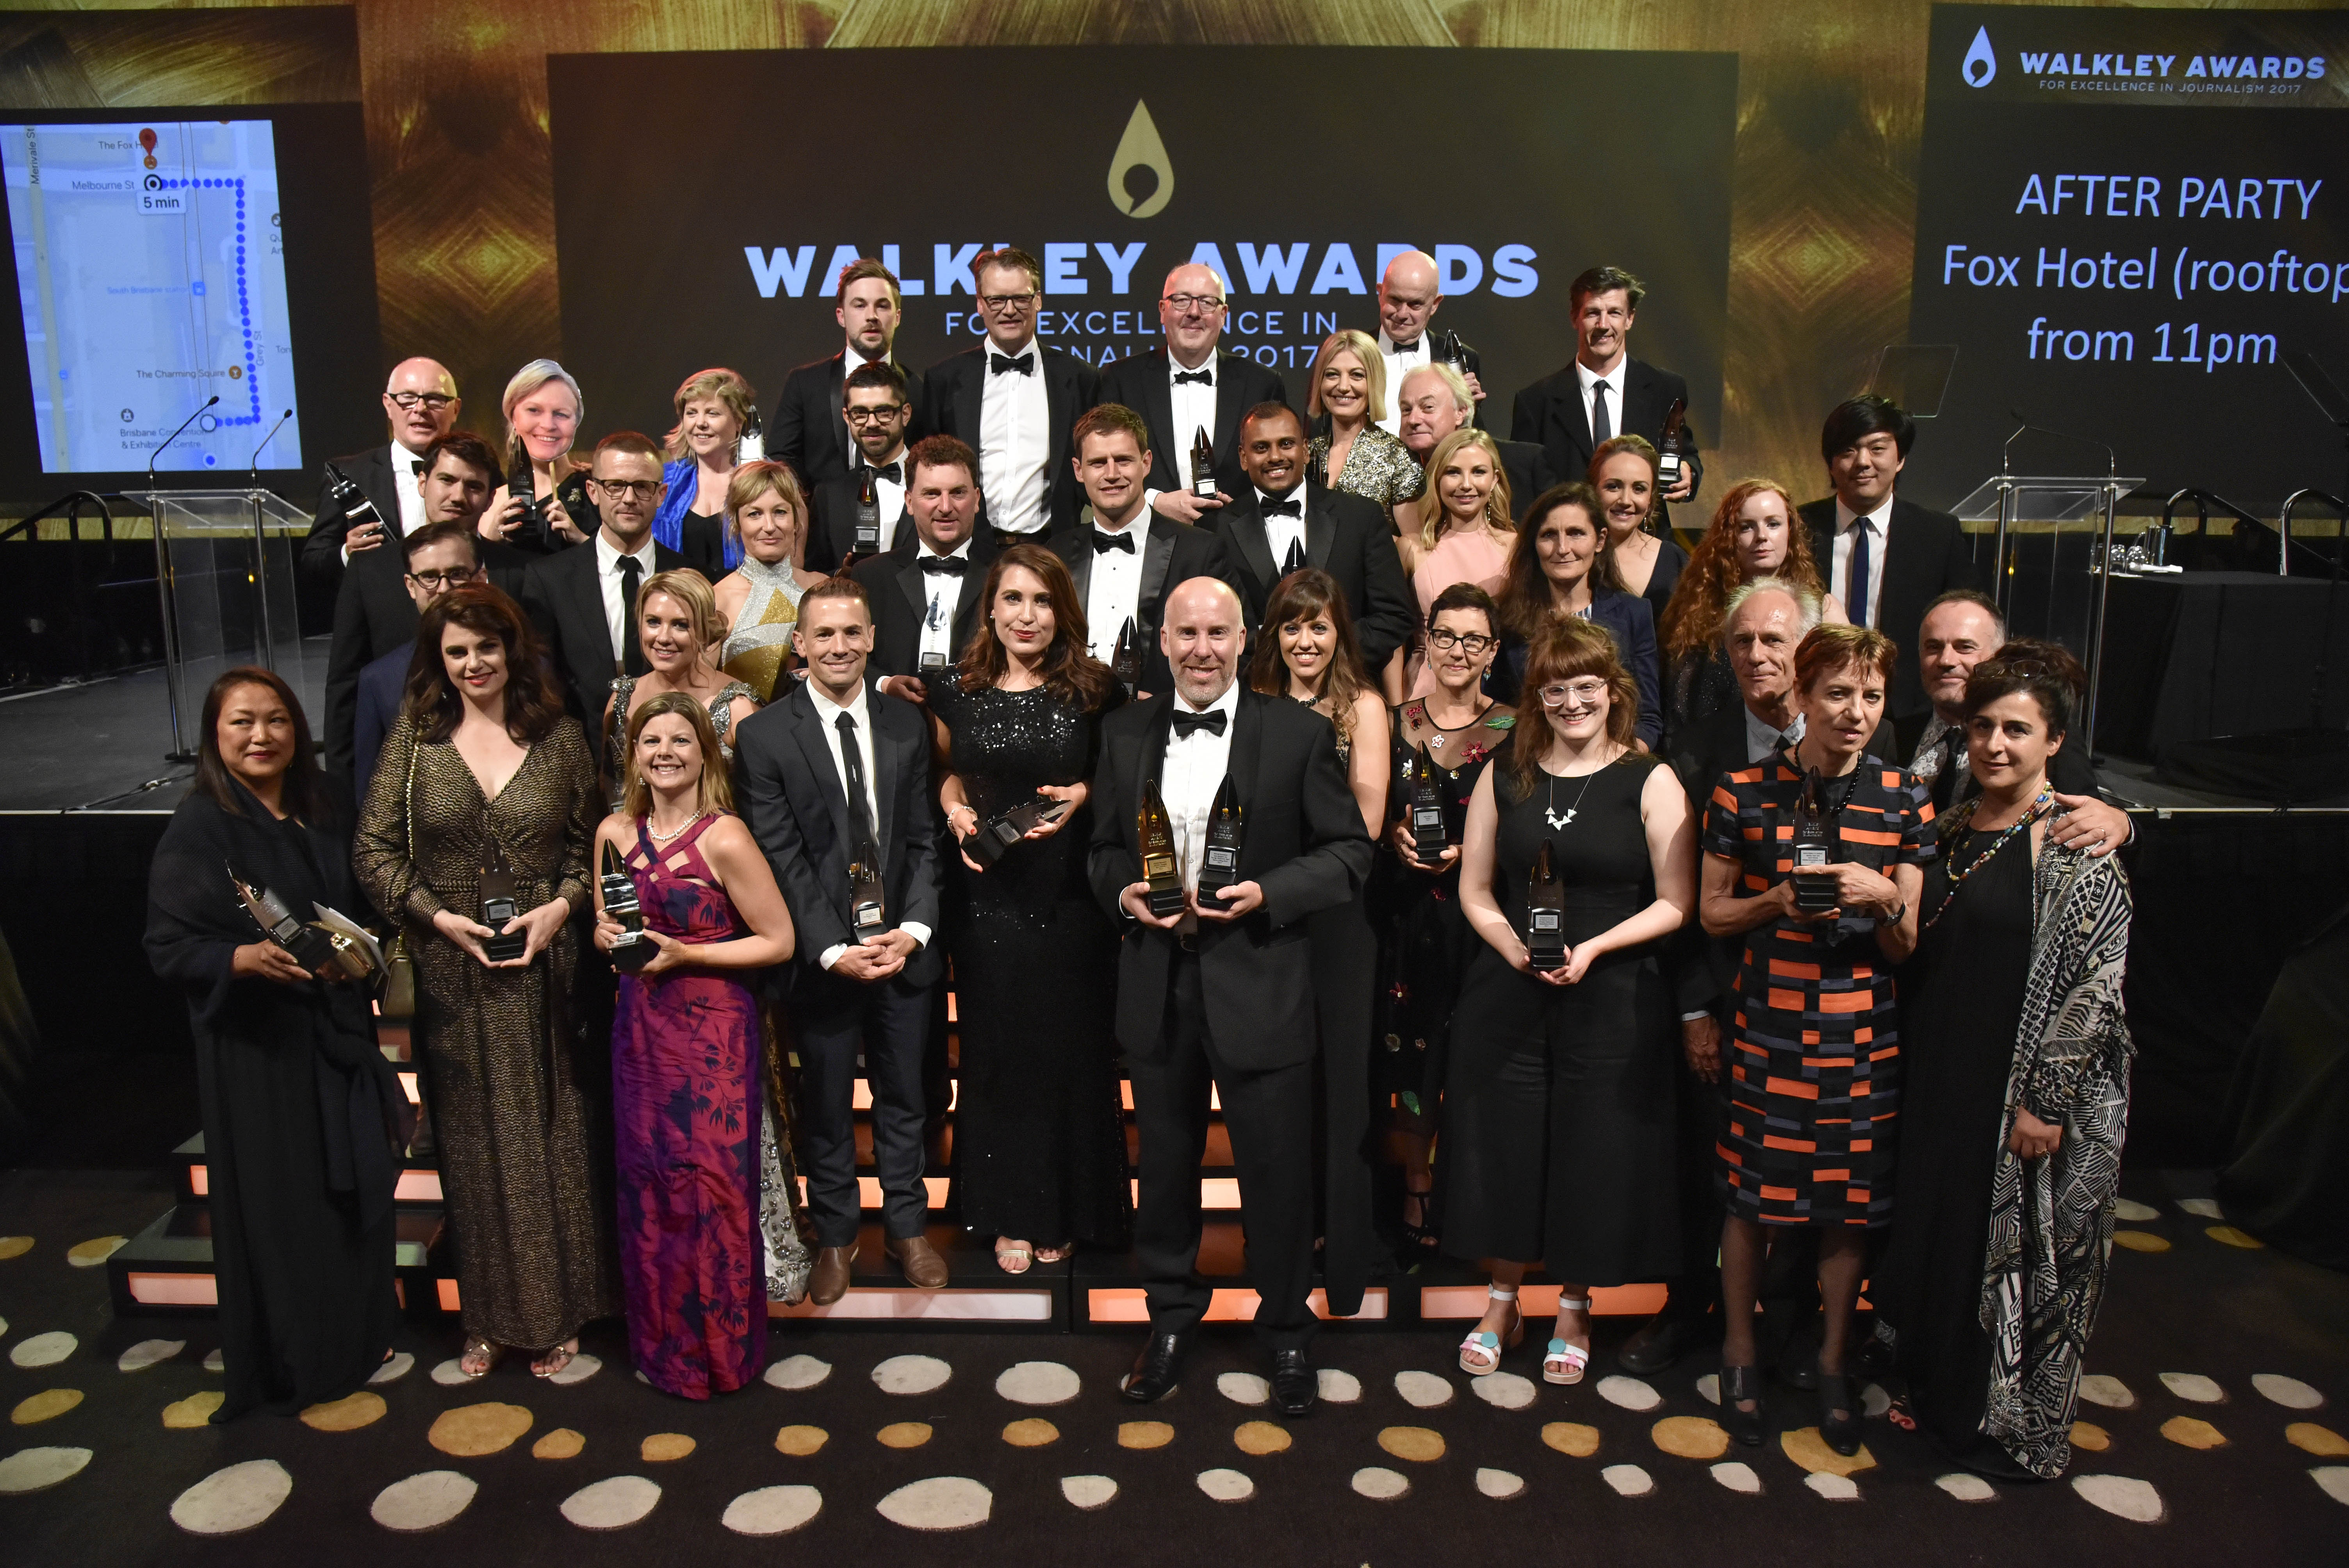 Michael Bachelard and Kate Geraghty win Gold at 62nd Walkley Awards for Mosul coverage